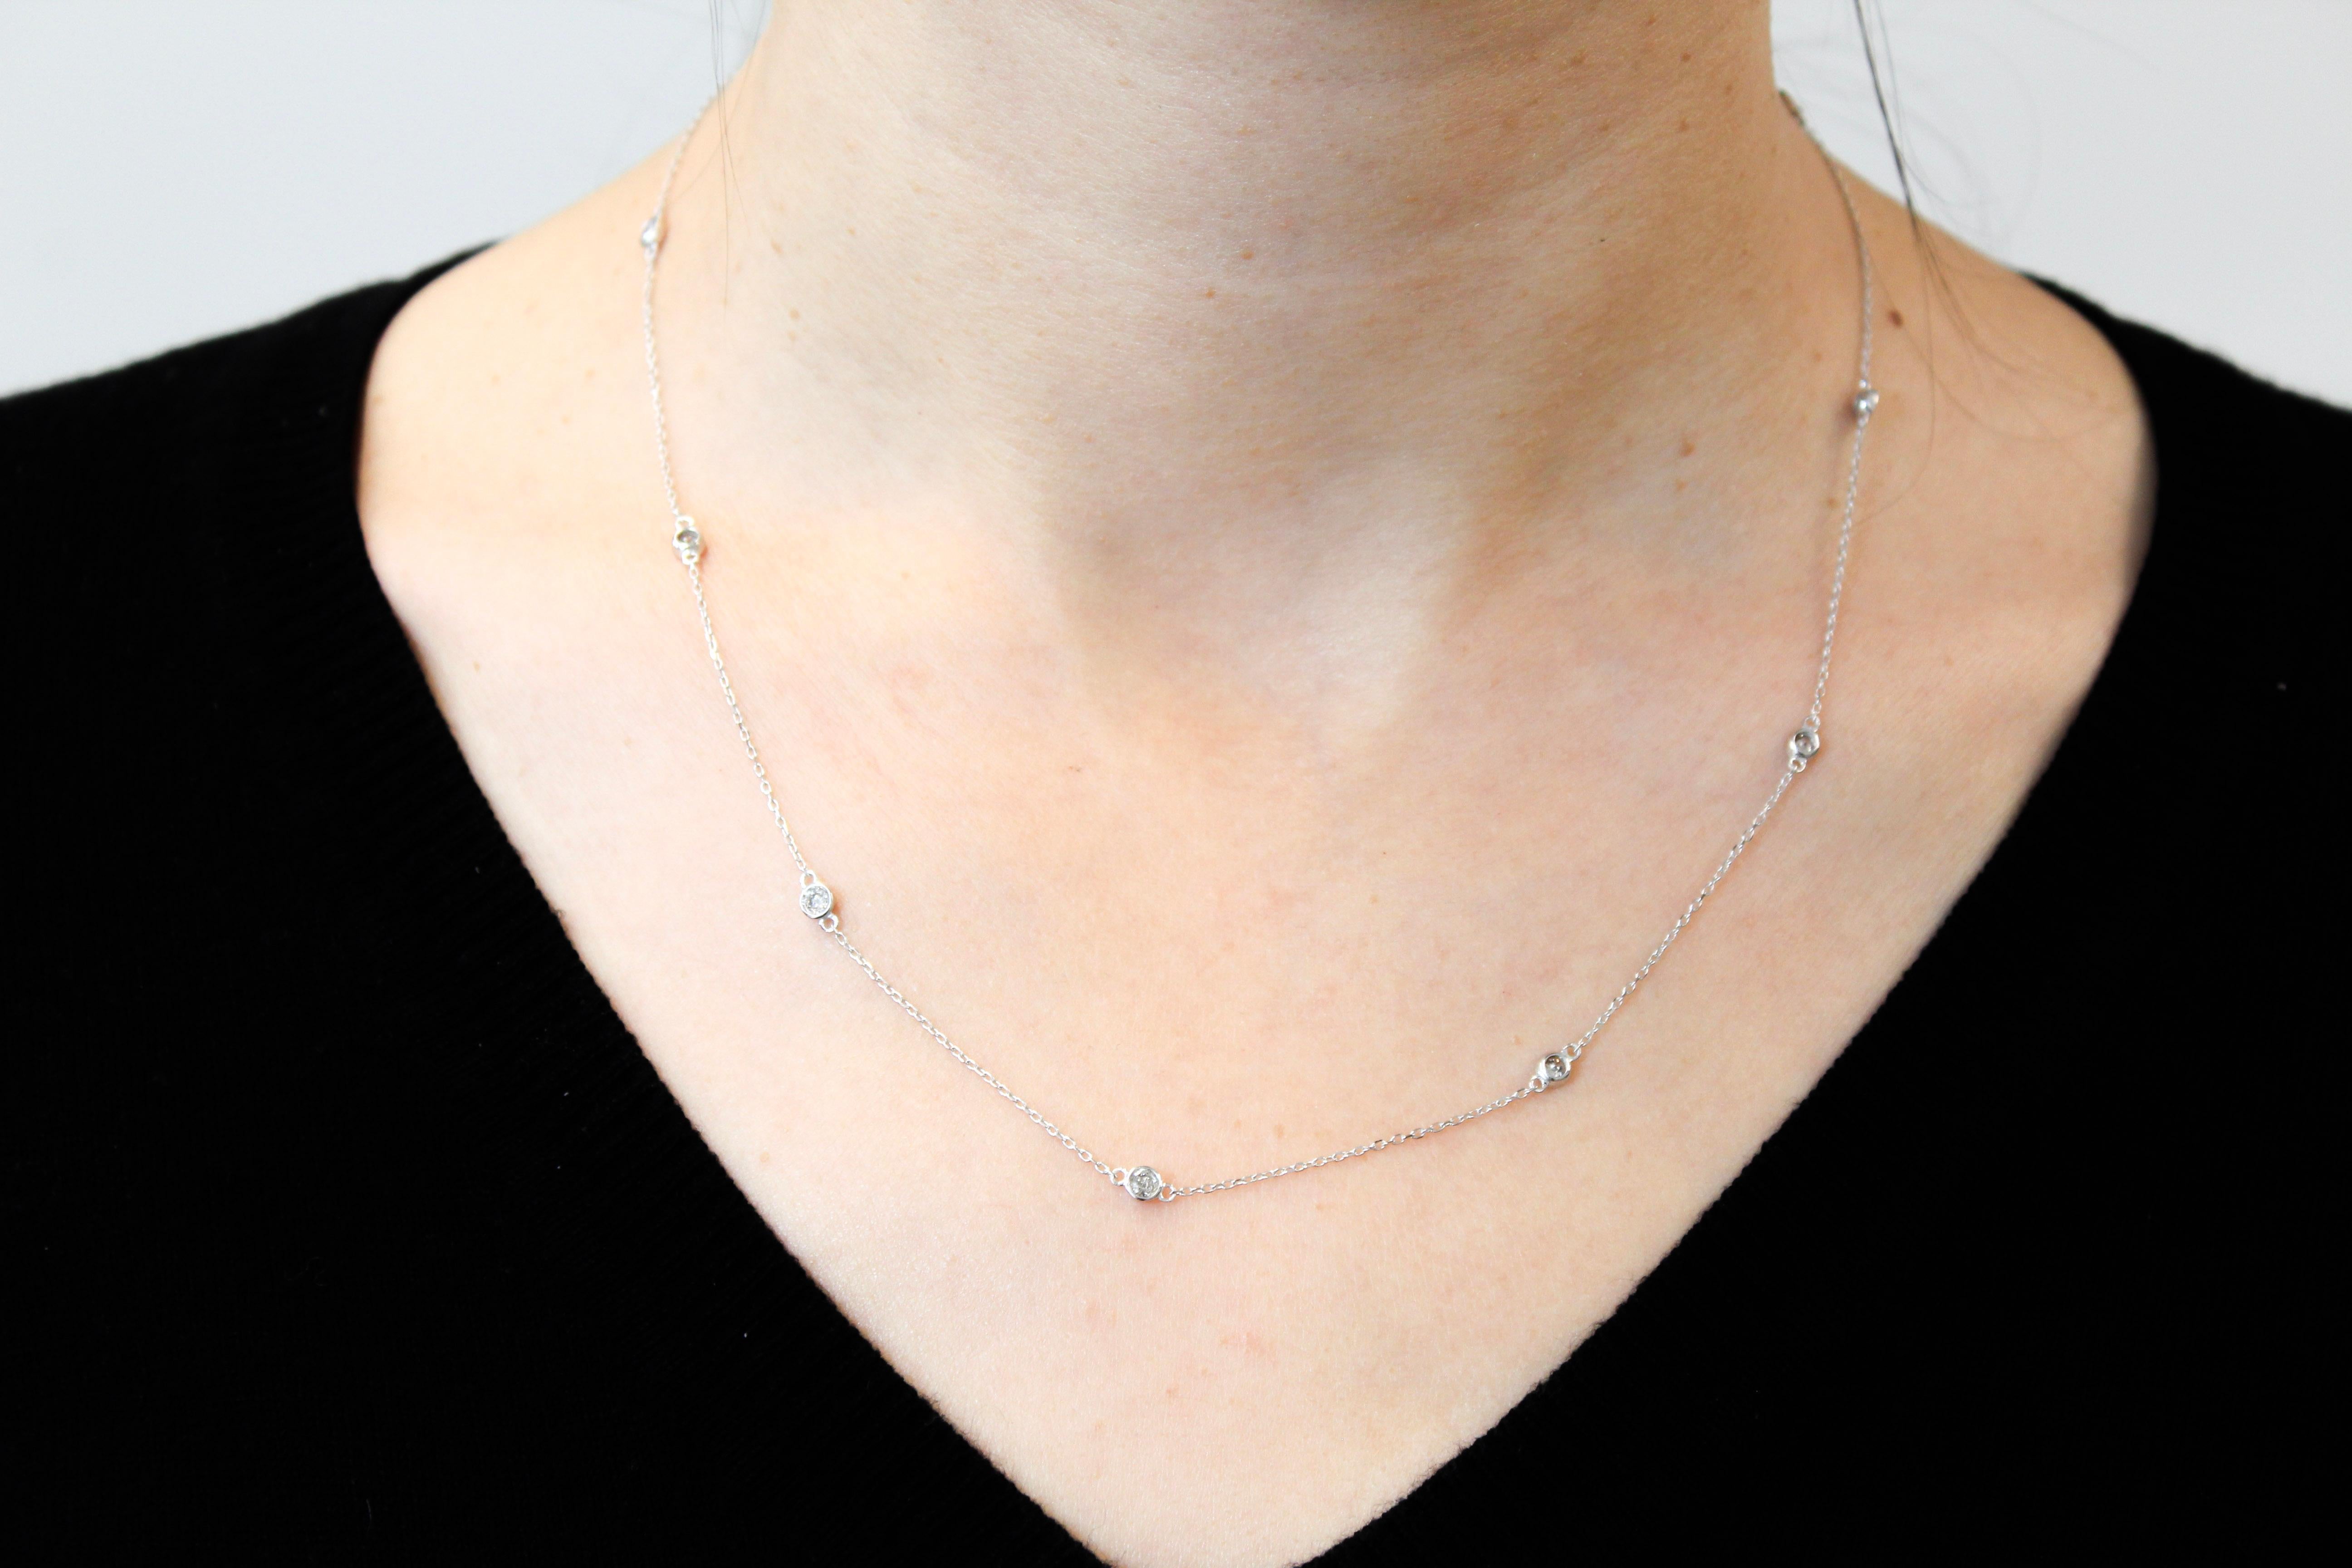 A gorgeous diamond necklace will rarely go overlooked. This 18” piece is both rare and stunning. It includes bezels that set white round diamonds. There are 10 white diamonds that total 1.00 and are I-J color and I1/I2 clarity. This versatile